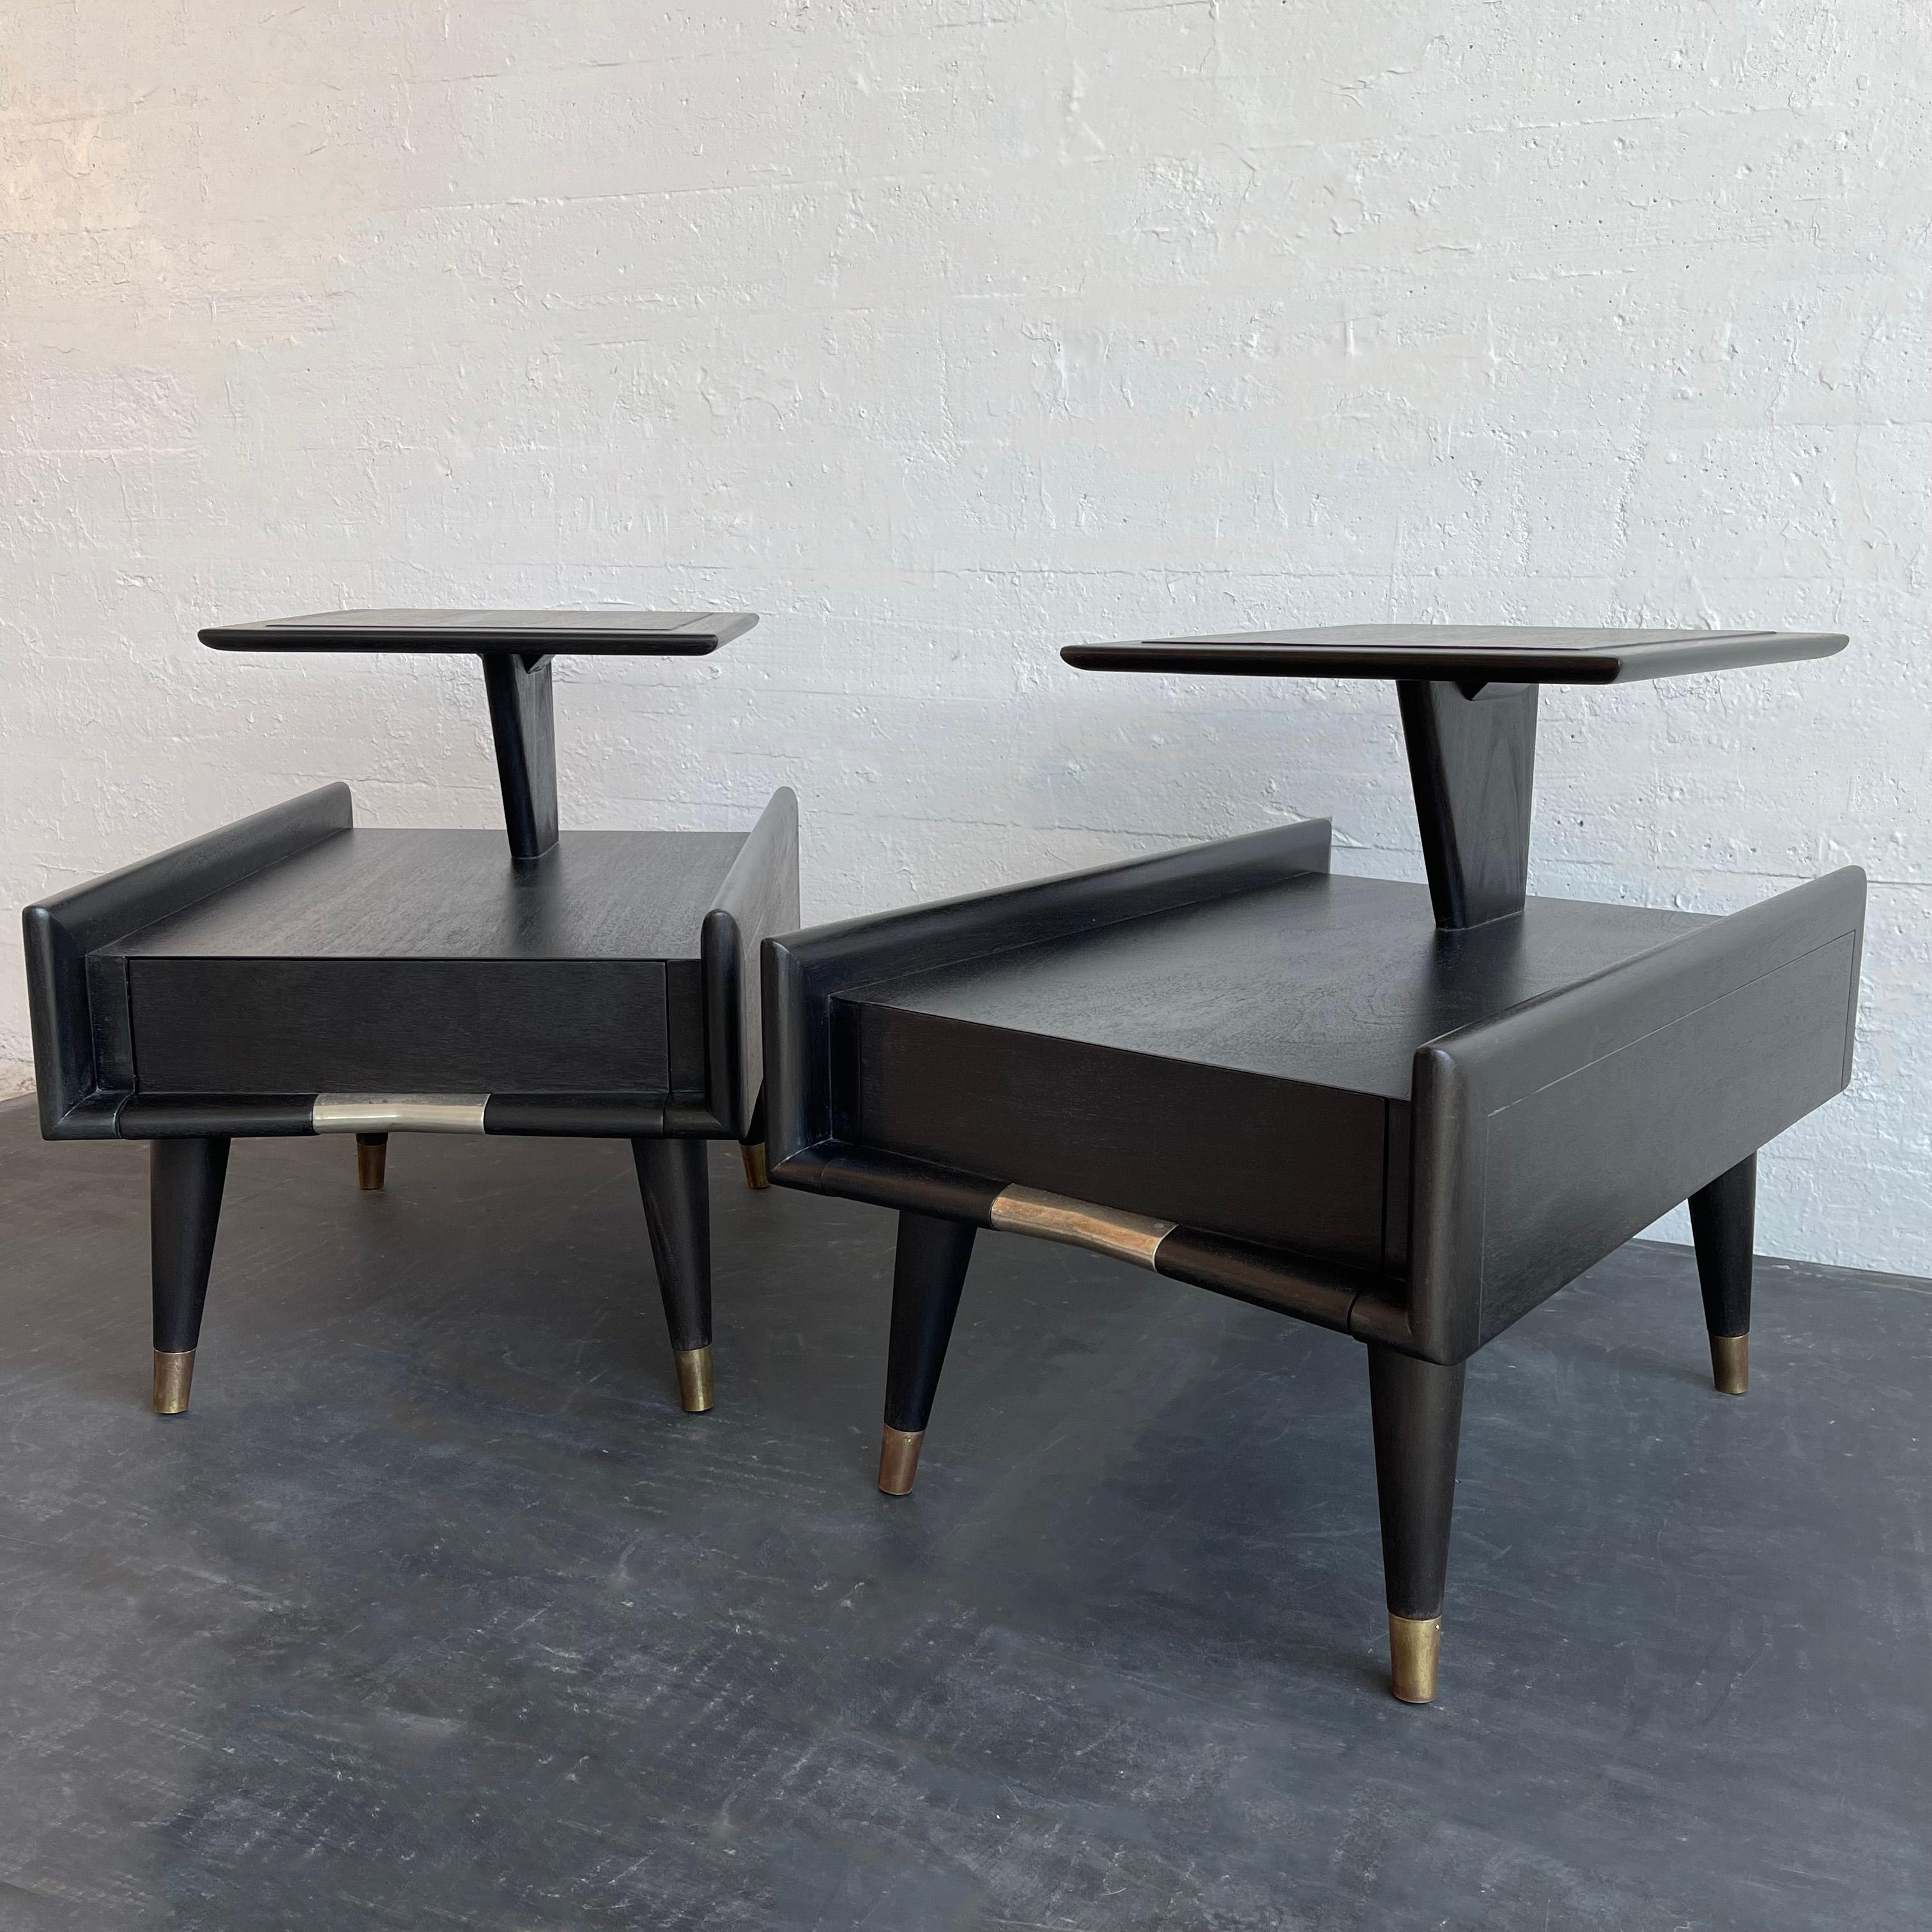 American Mid-Century Modern Ebonized Stepped End Tables By Gordon's Furniture  For Sale